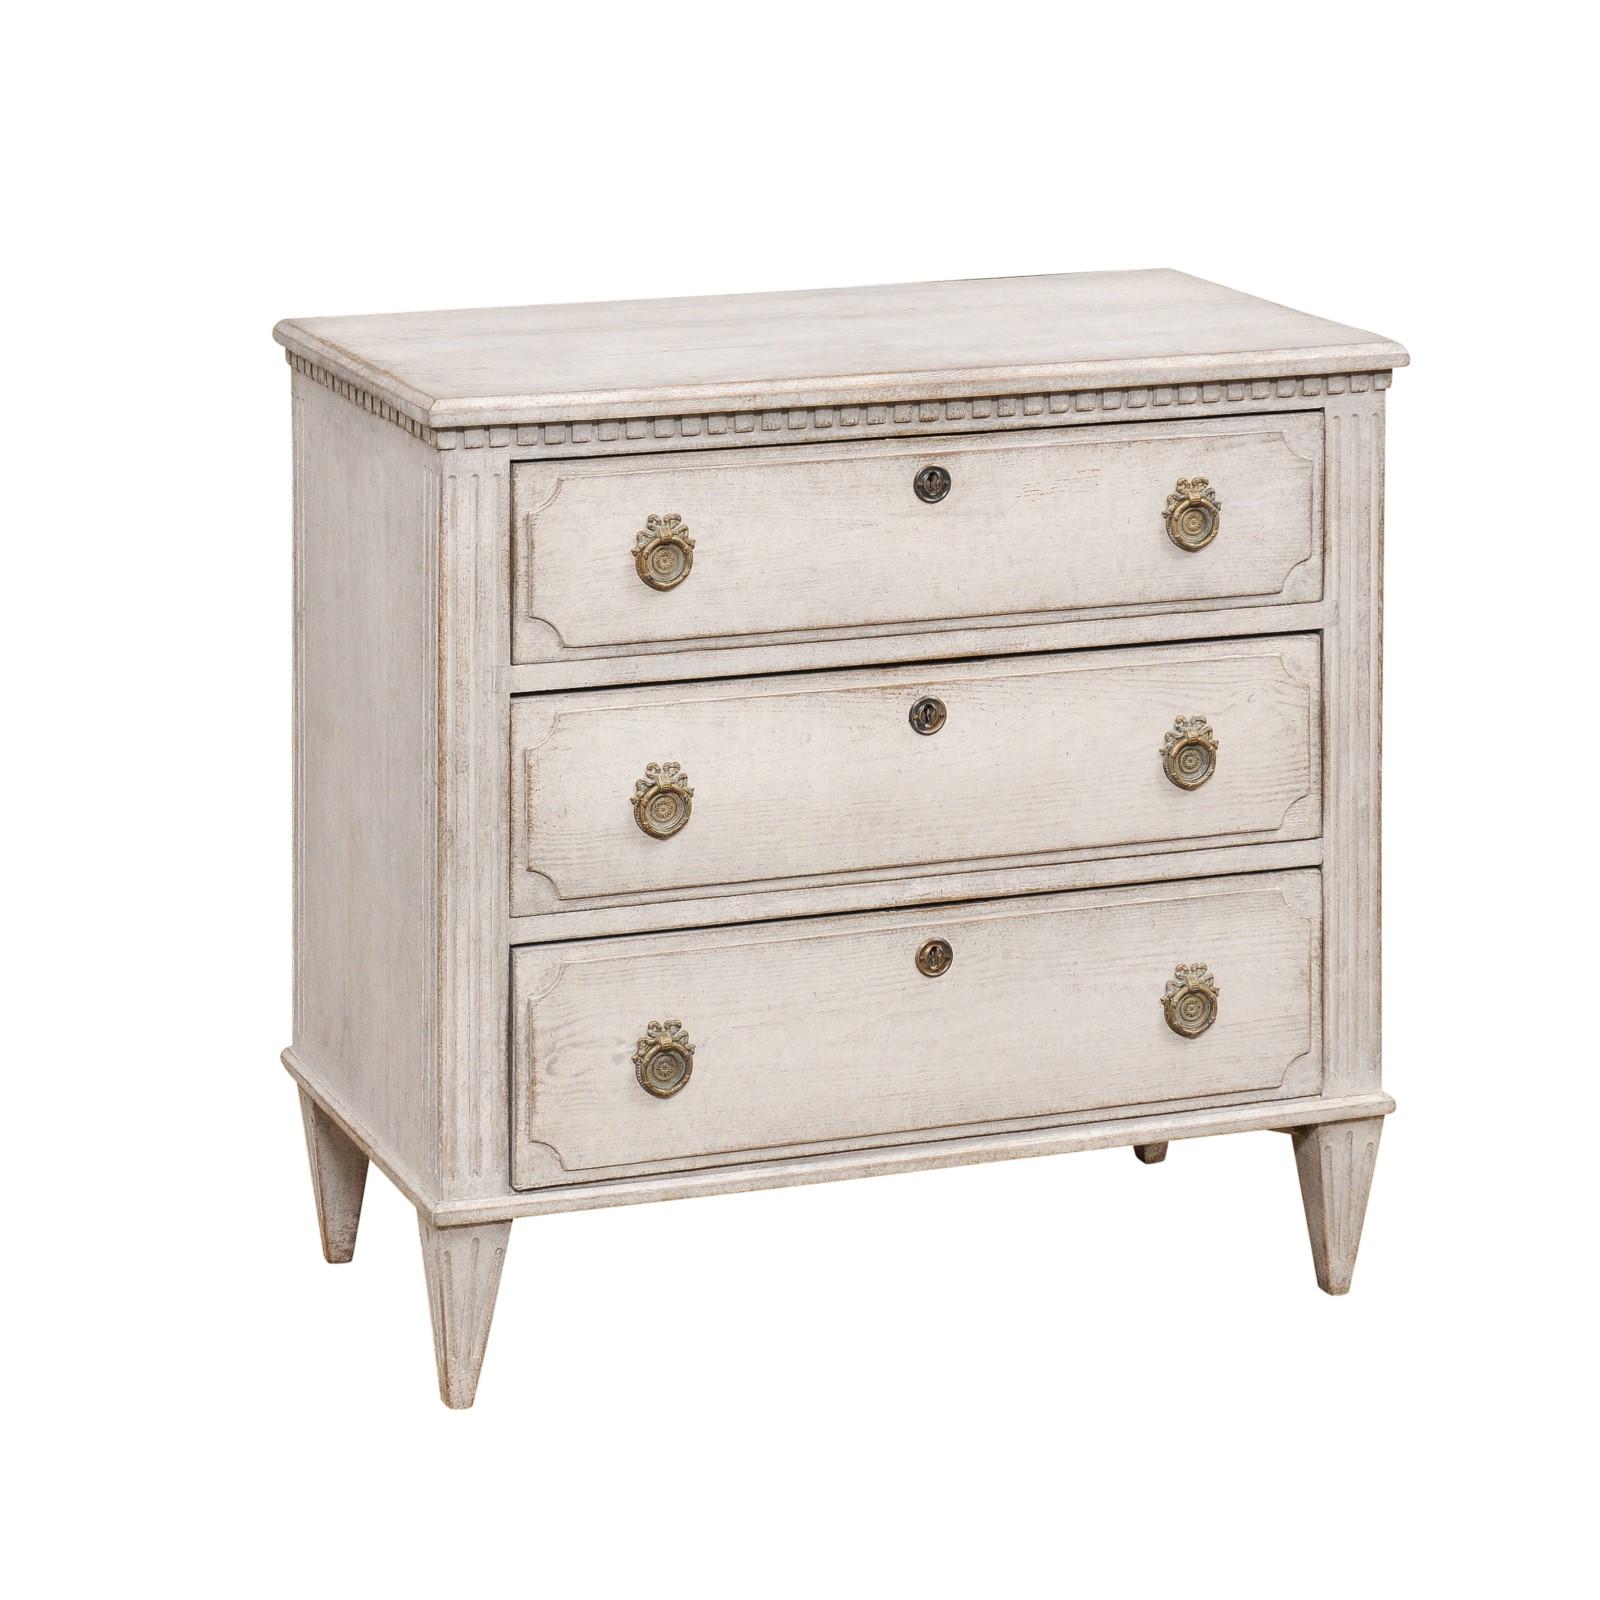 A Swedish Gustavian style painted wood chest from the 19th century, with three drawers, carved dentil molding, fluted side supports and tapered feet. Created in Sweden during the 19th century, this chest of drawers showcases the stylistic